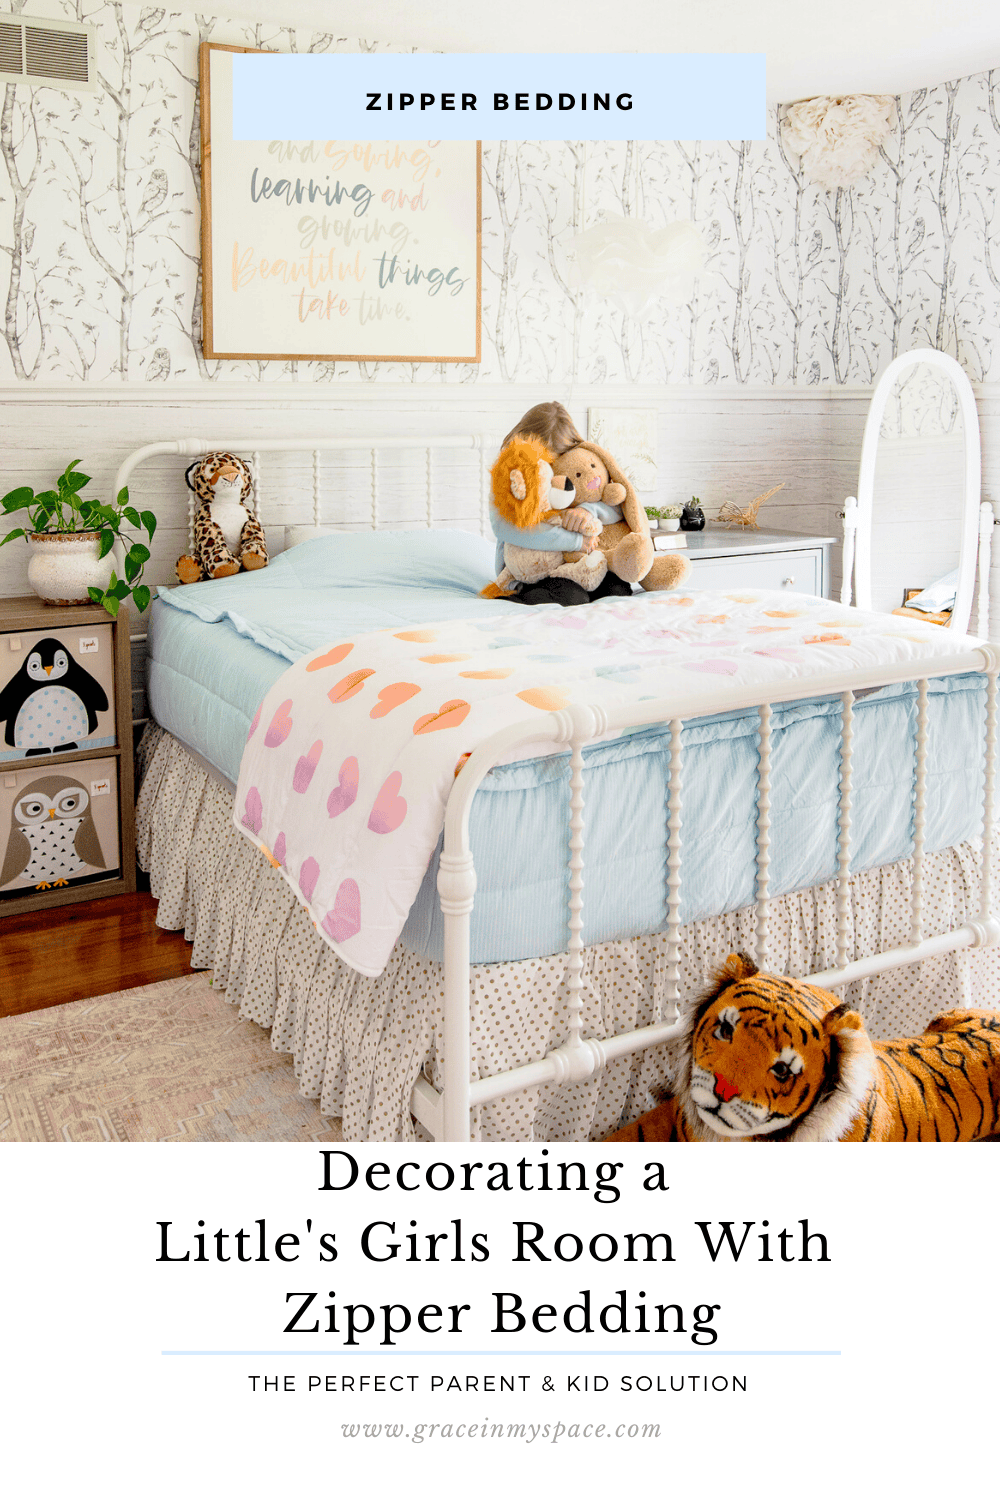 Decorating a Little Girl’s Room with Zipper Bedding